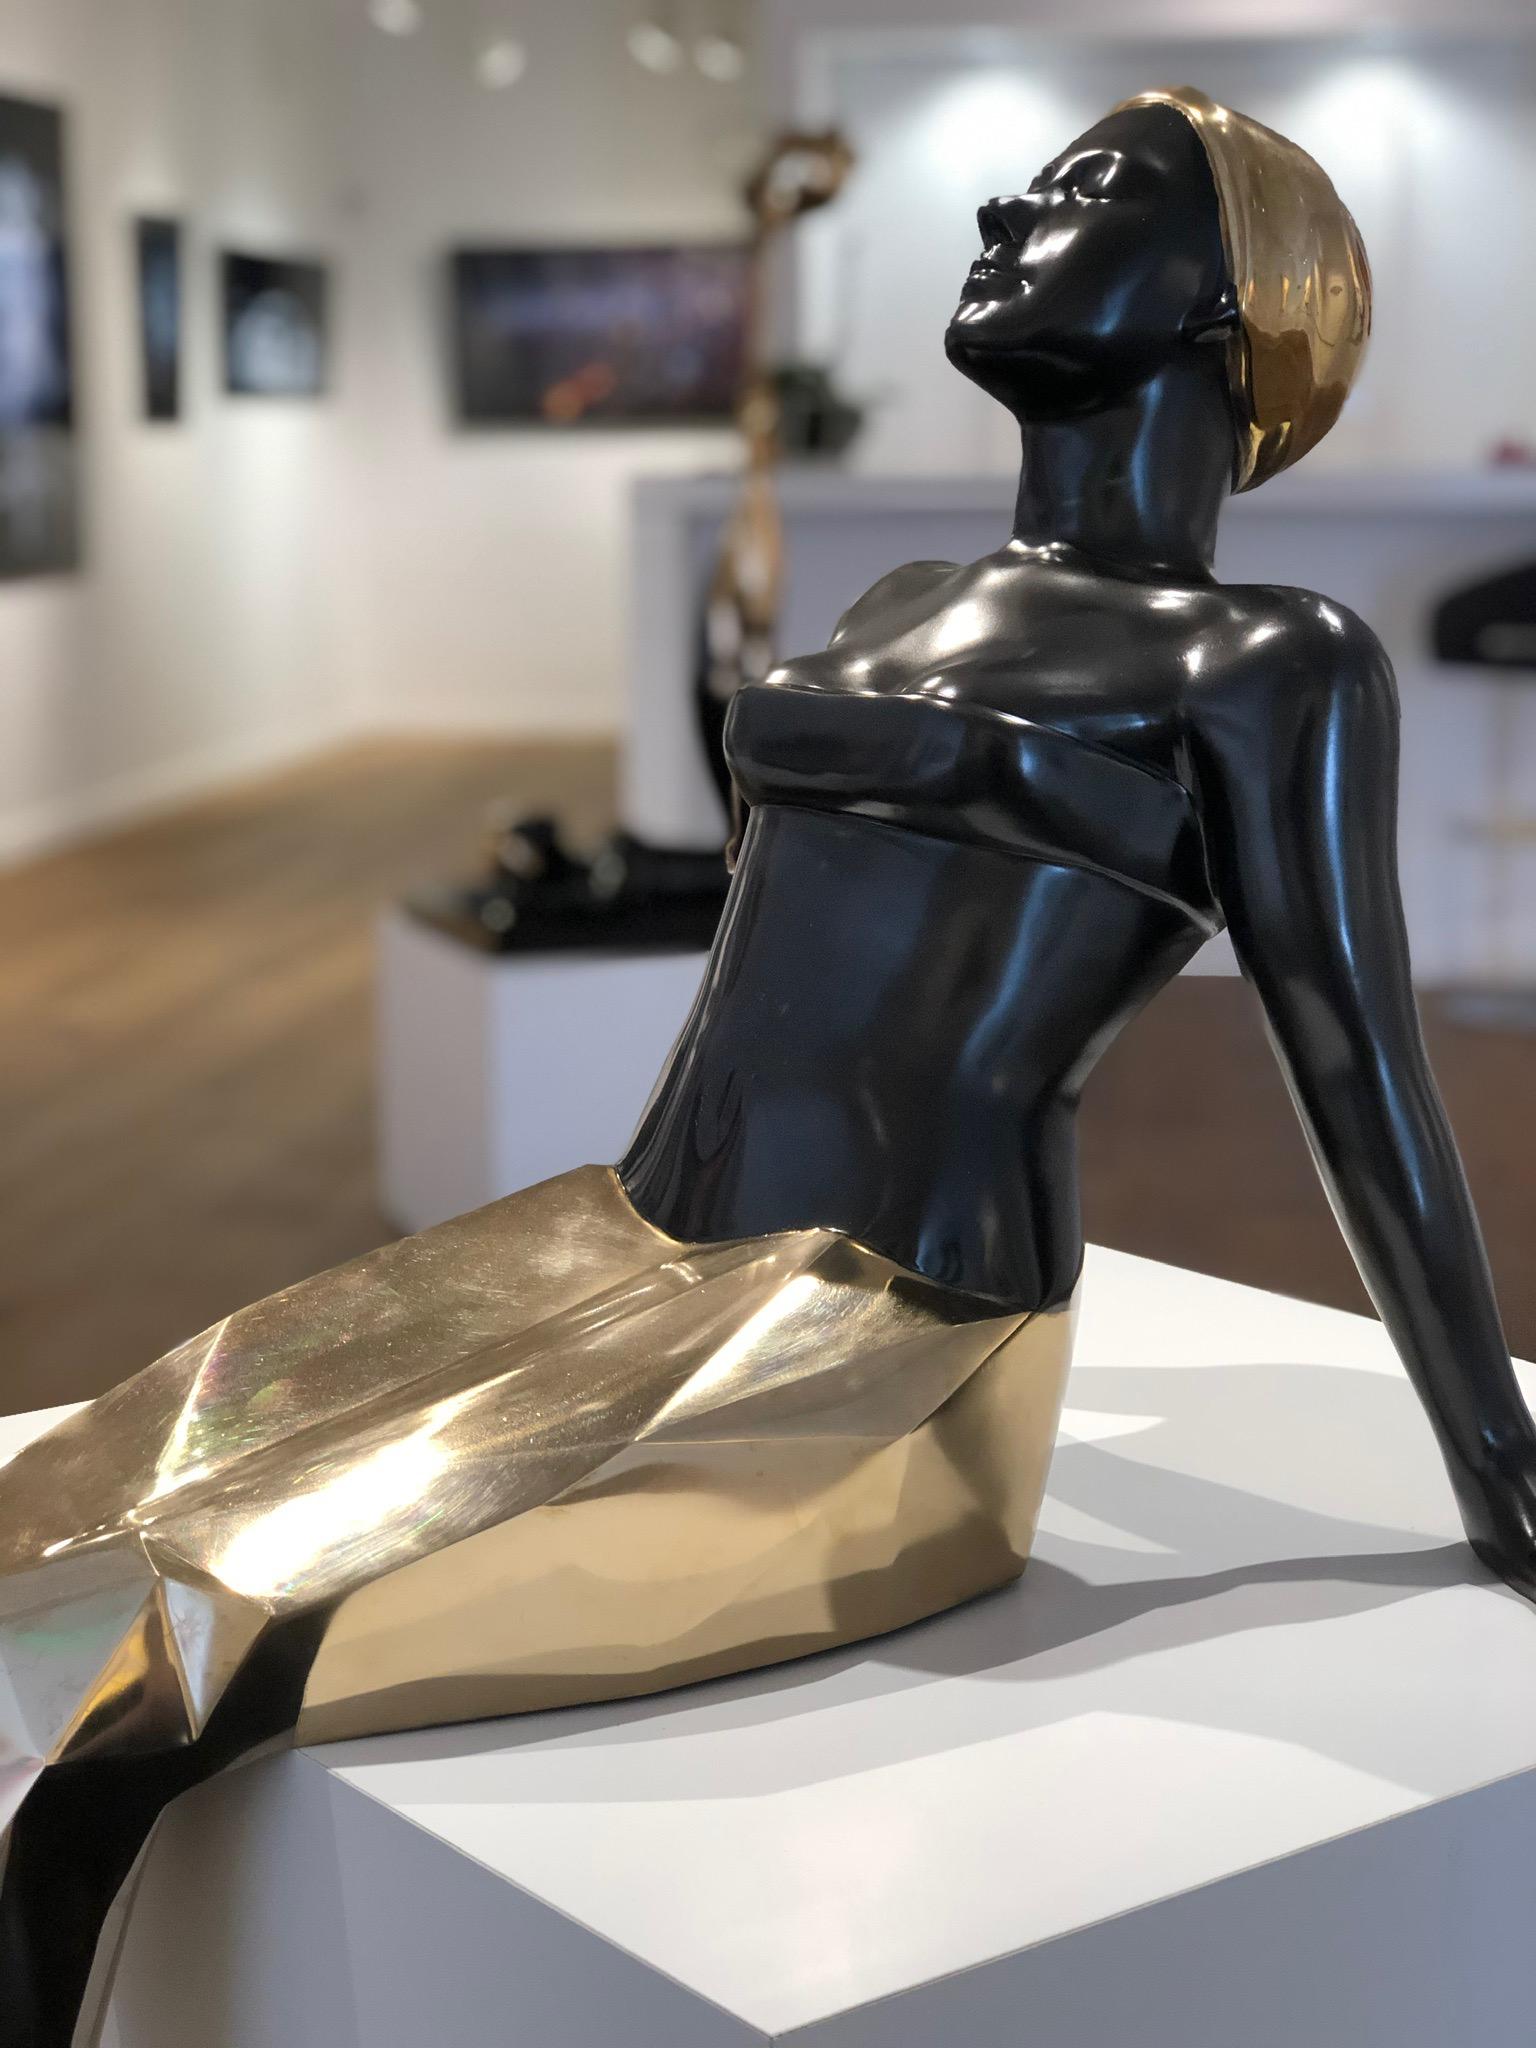 Ignacio Gana
Mermaid Gold
Bronze on granite base
Signed and numbered by artist


Available in two sizes:
23 x 12 x 11 inches, From a series of 10
48 x 27 x 21 inches, From a series of 10


Currently on display at Art Angels

Ignacio